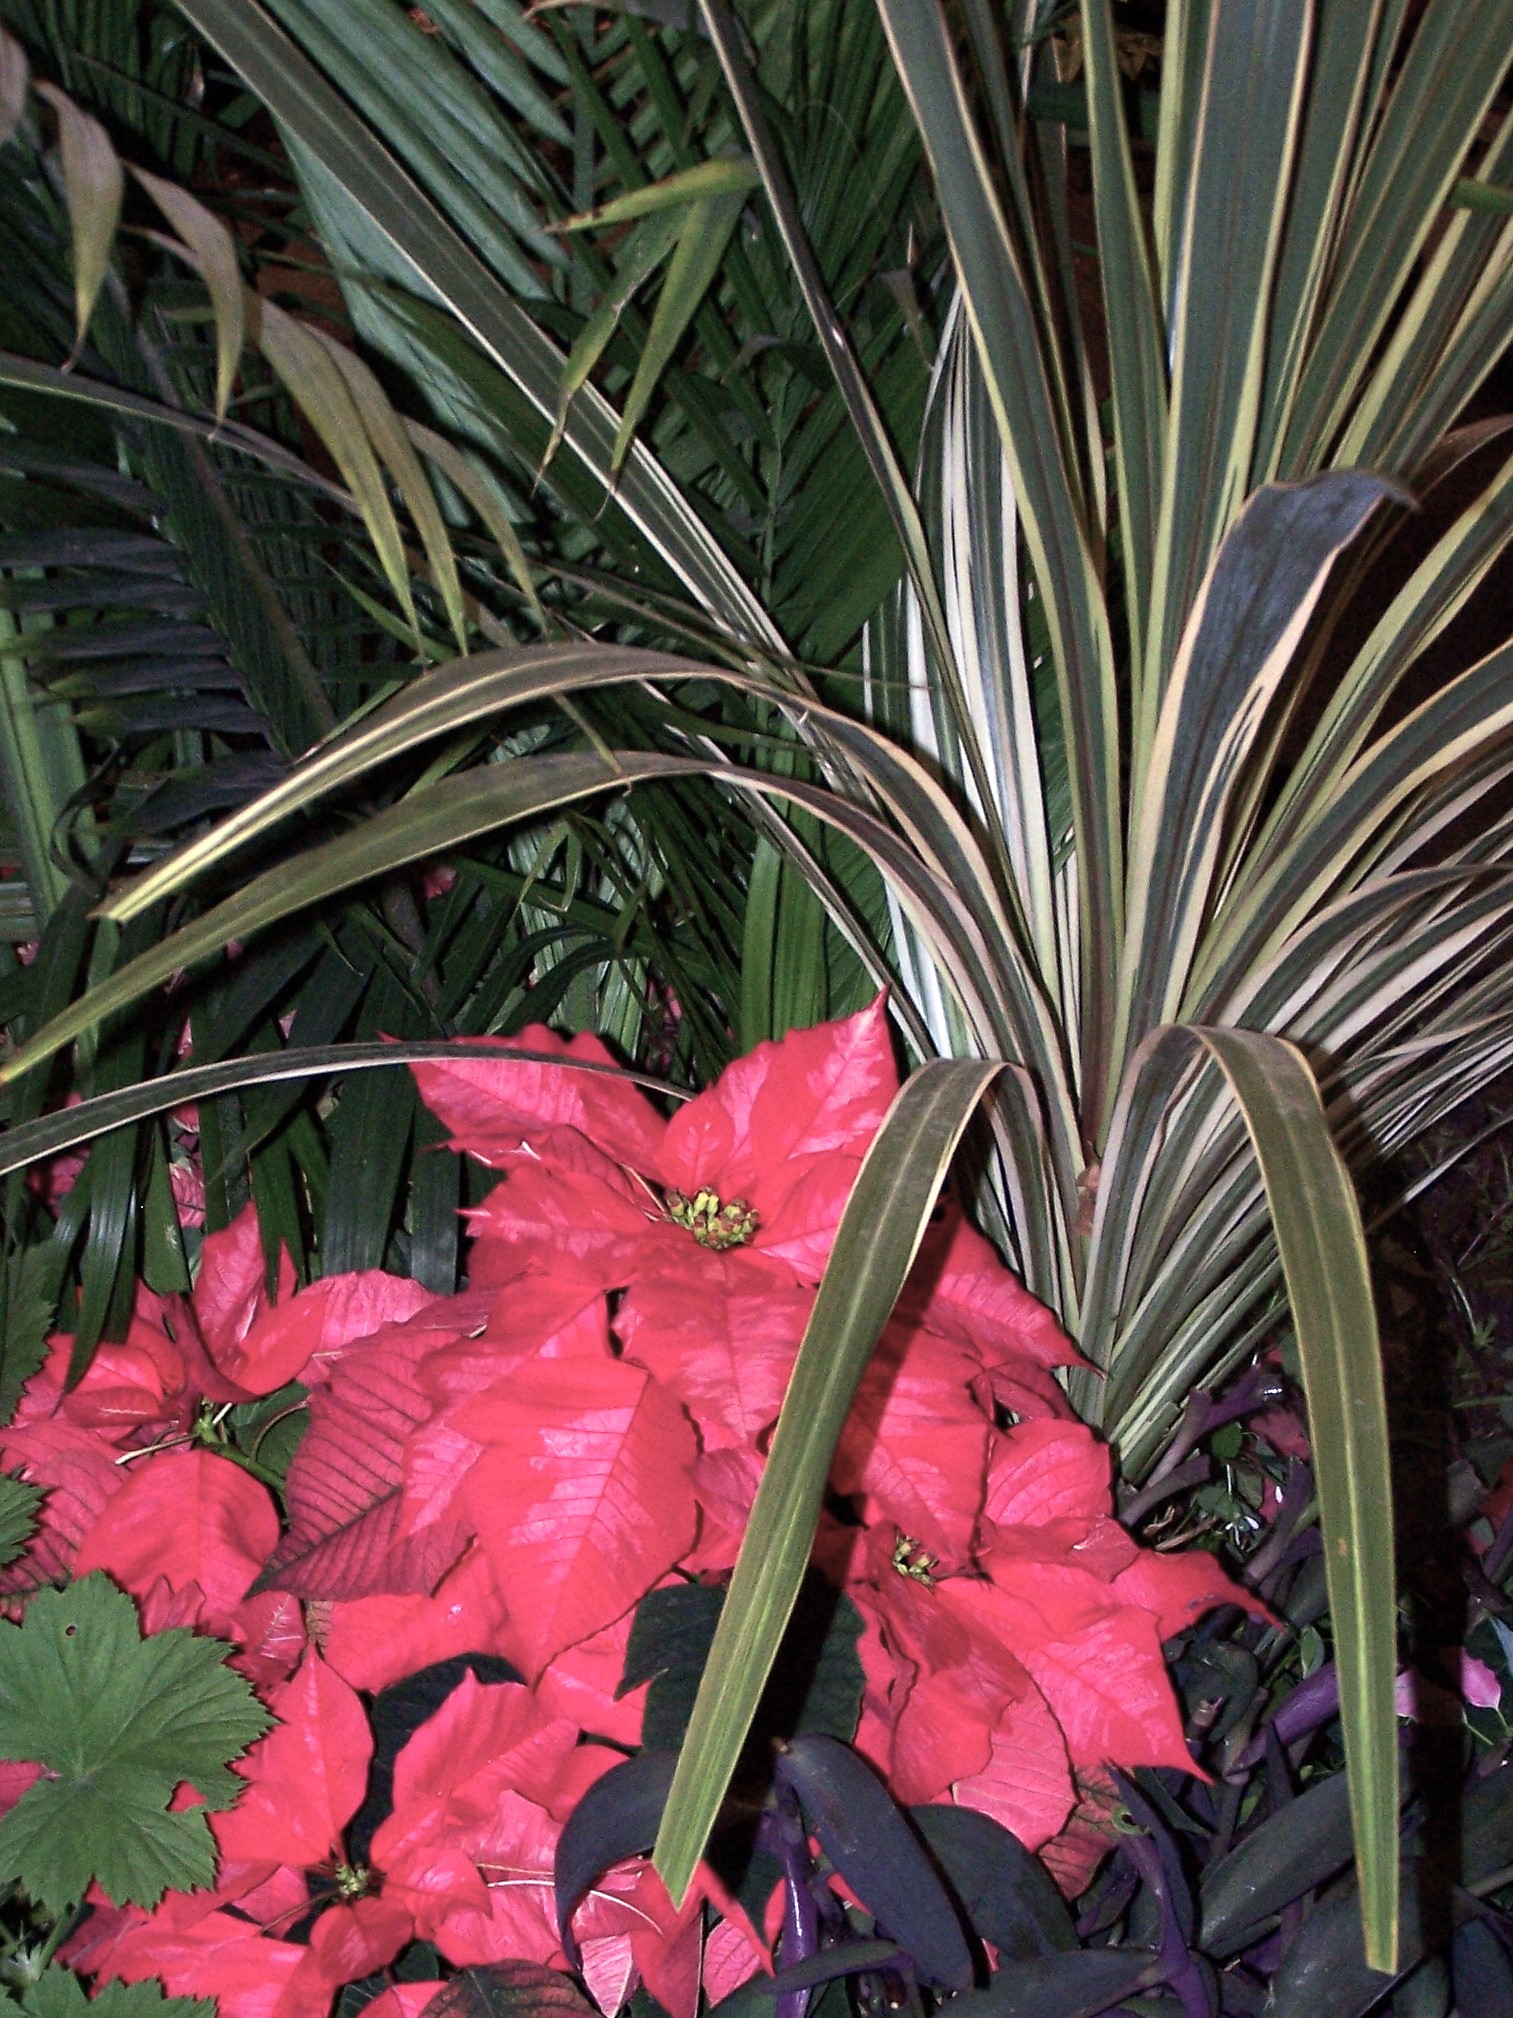 Tucking a pink and red poinsettia into this large houseplant updates your decor for the holidays with minimal effort.